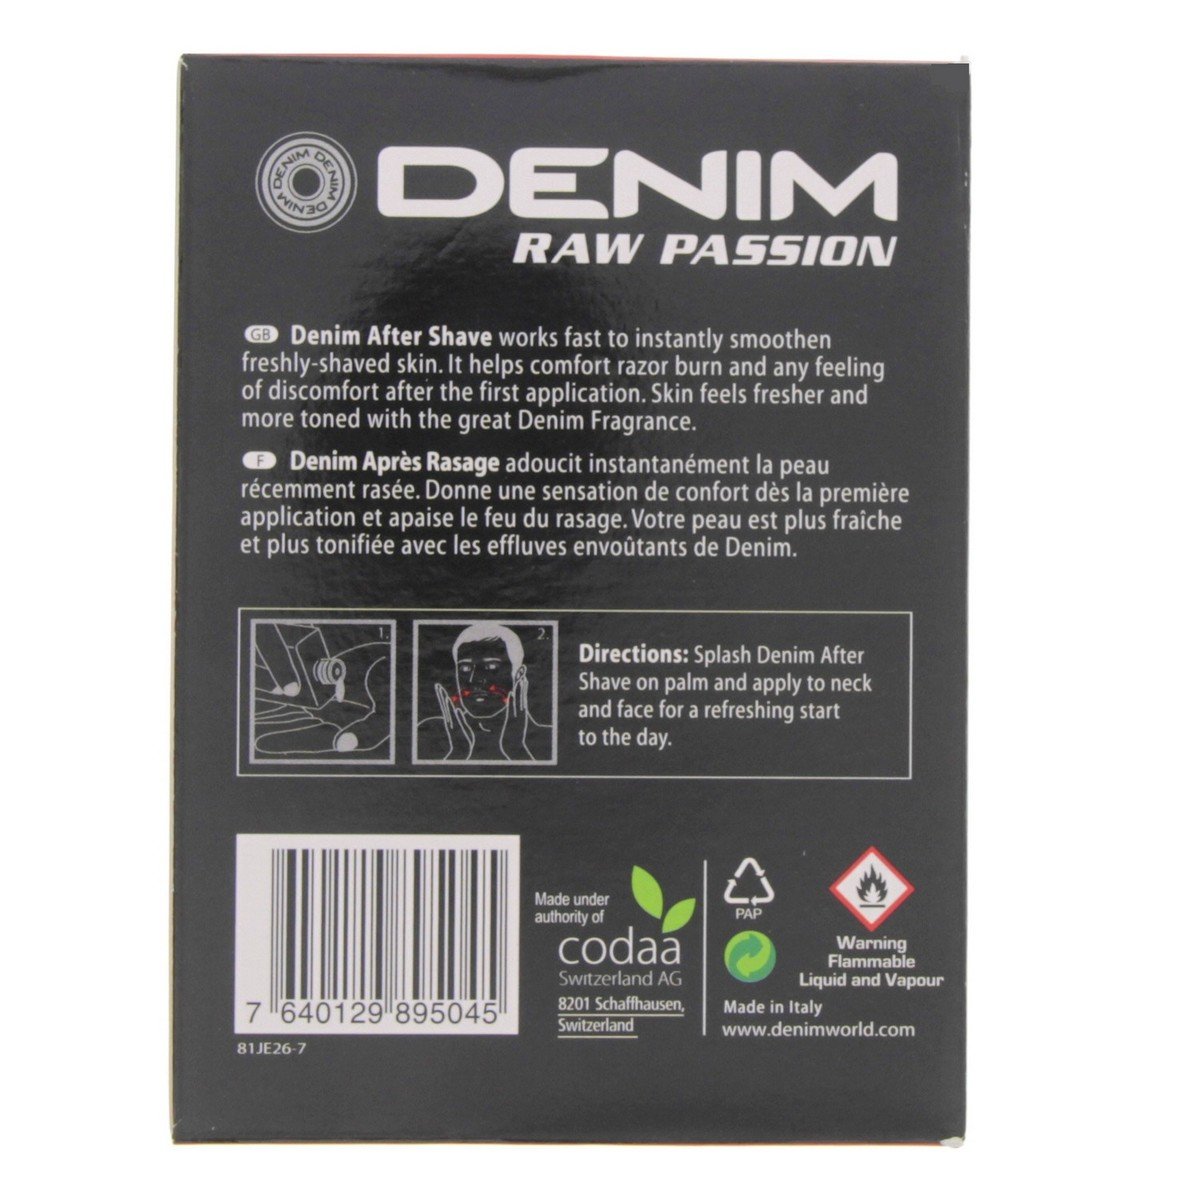 Denim After Shave Raw Passion 100 ml